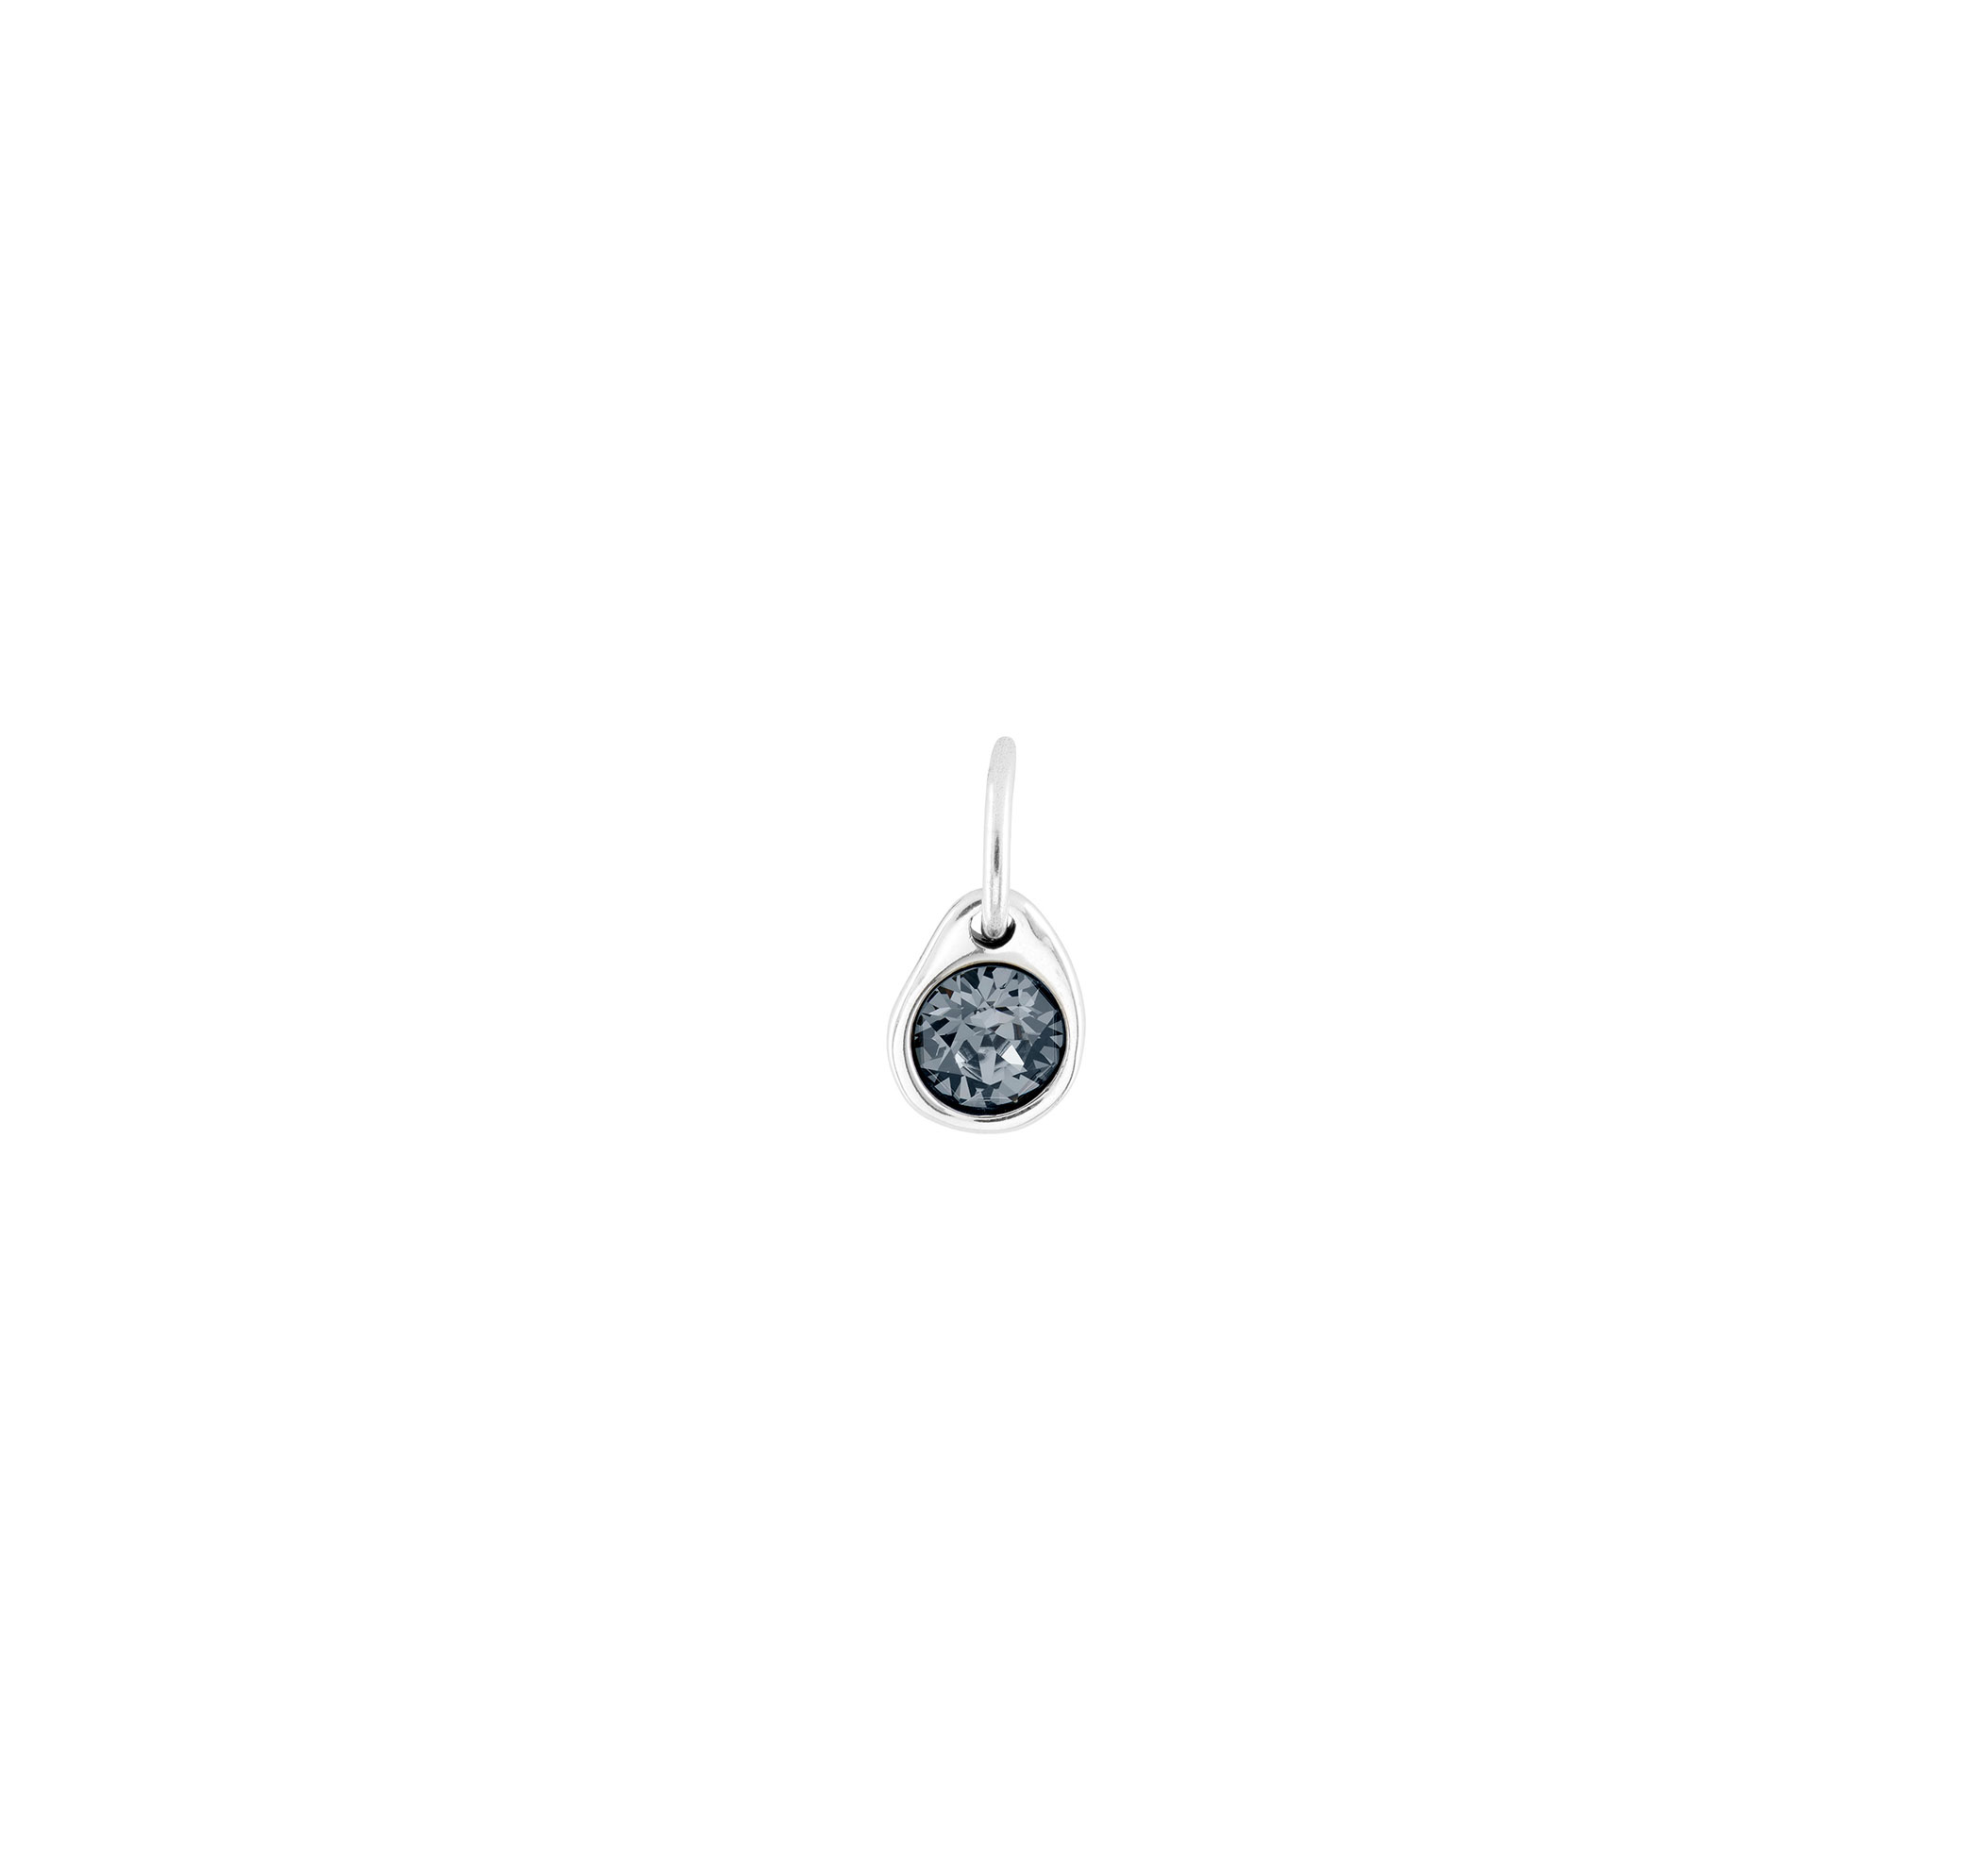 UNO DE 50 STERLING SILVER PLATED GREY CHARM